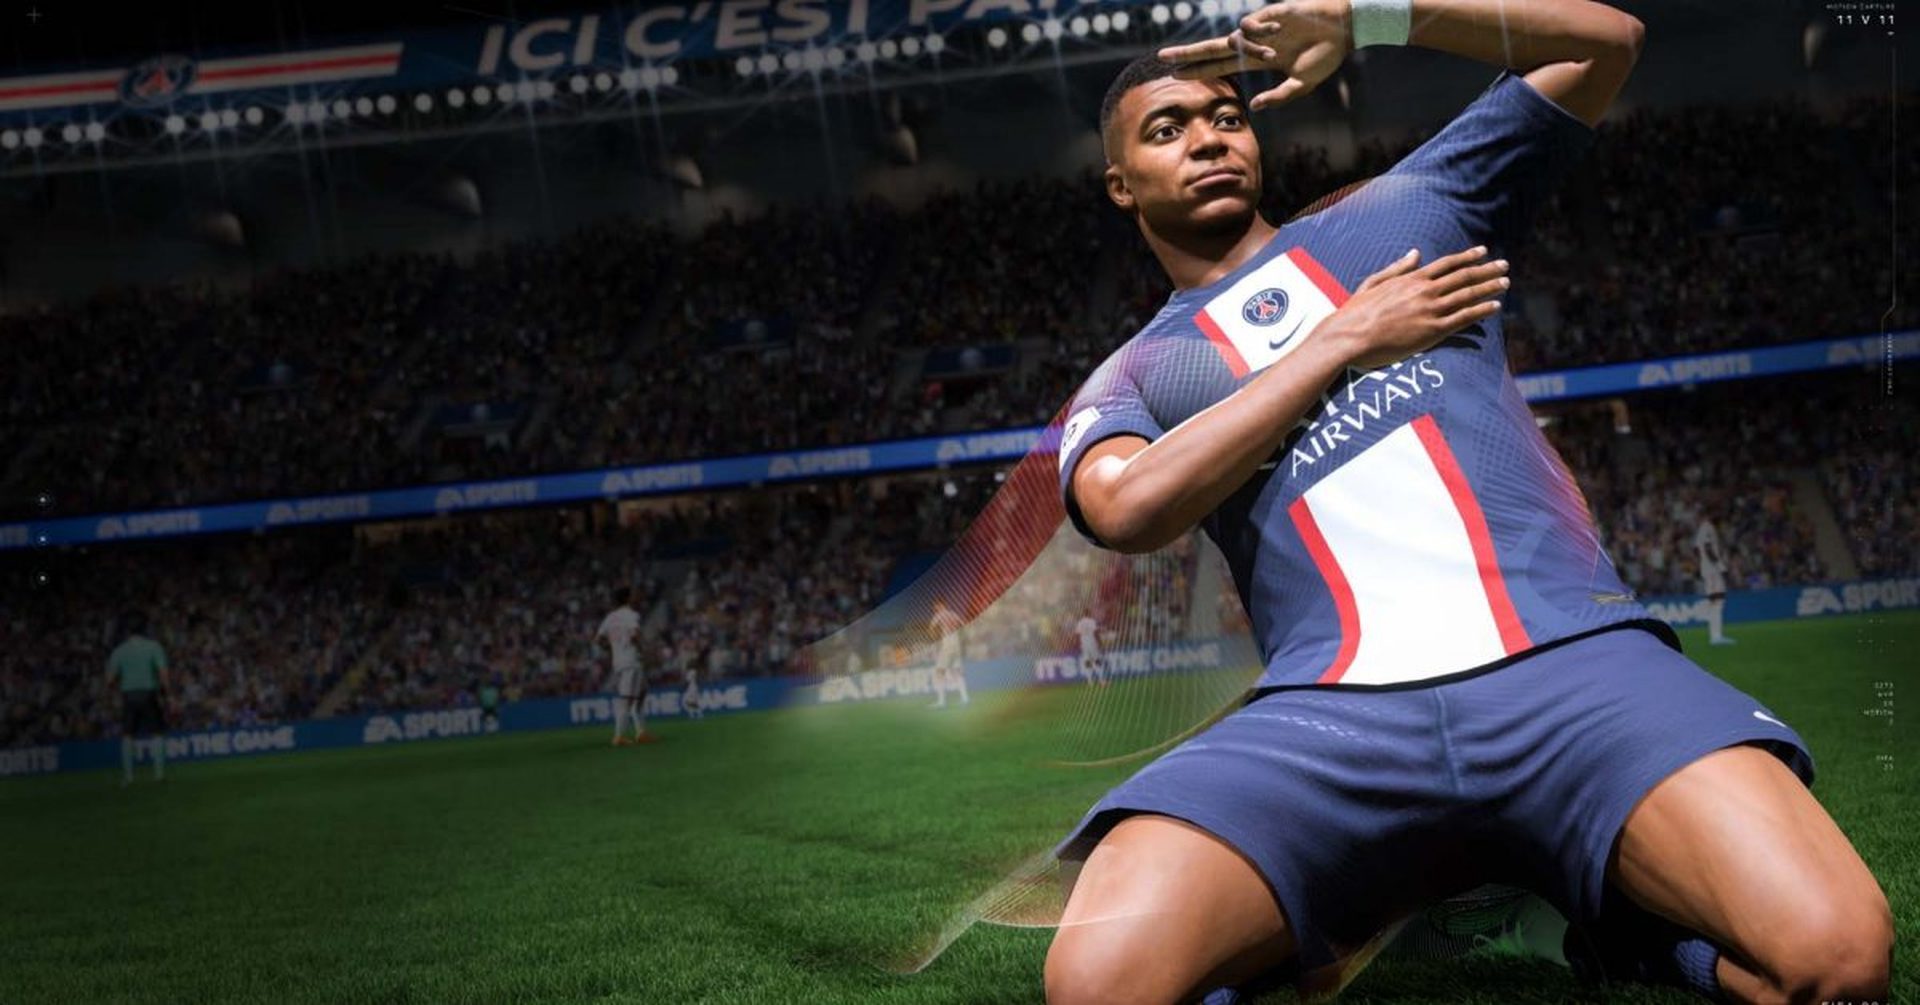 FIFA 23 Store Checkout Error: How to fix it?